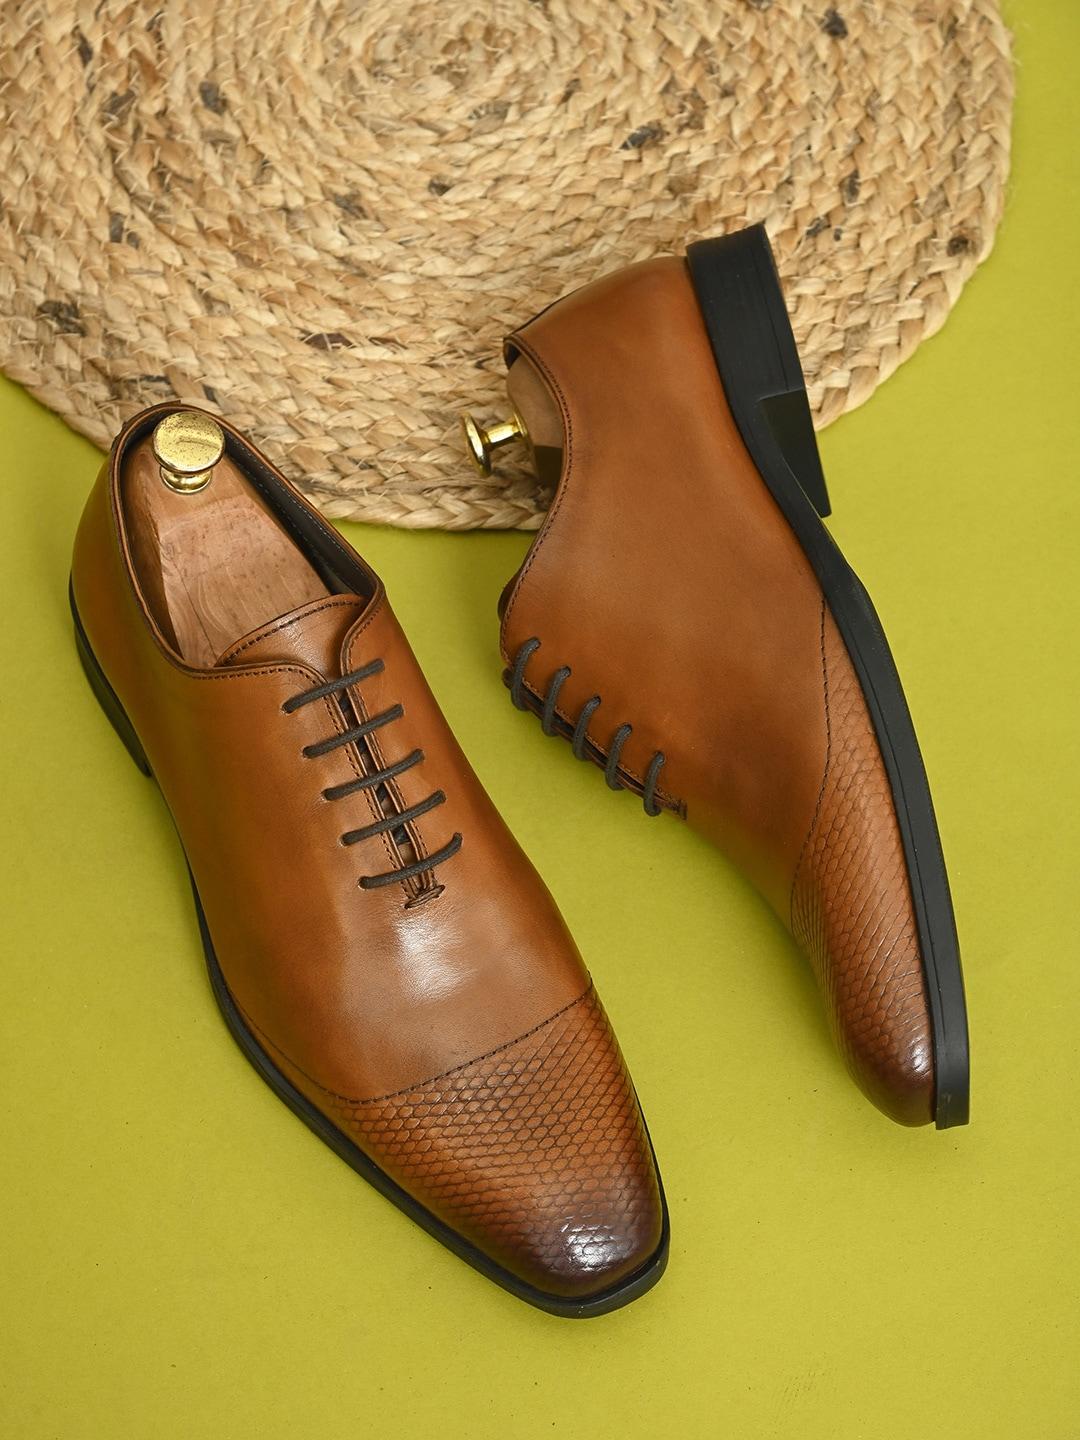 house-of-pataudi-men-genuine-leather-formal-derby-shoes